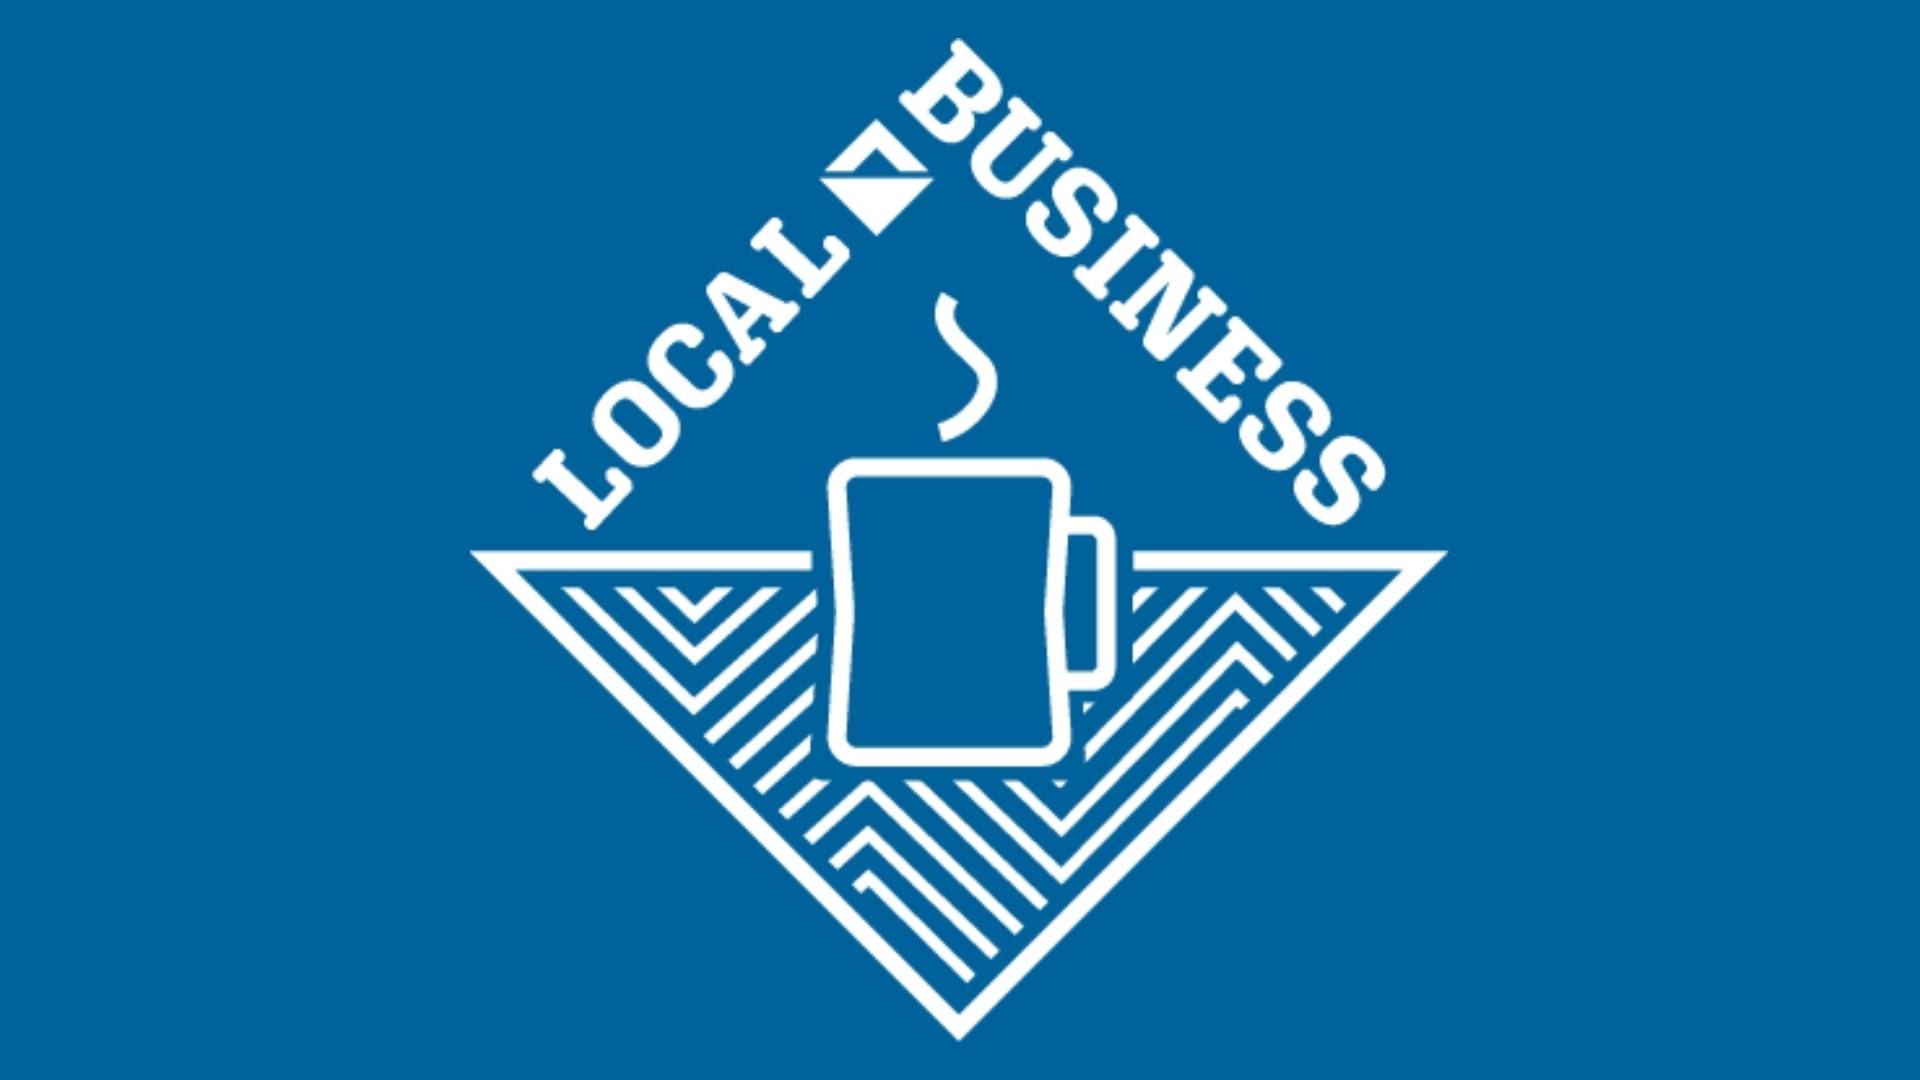 Local Business Events